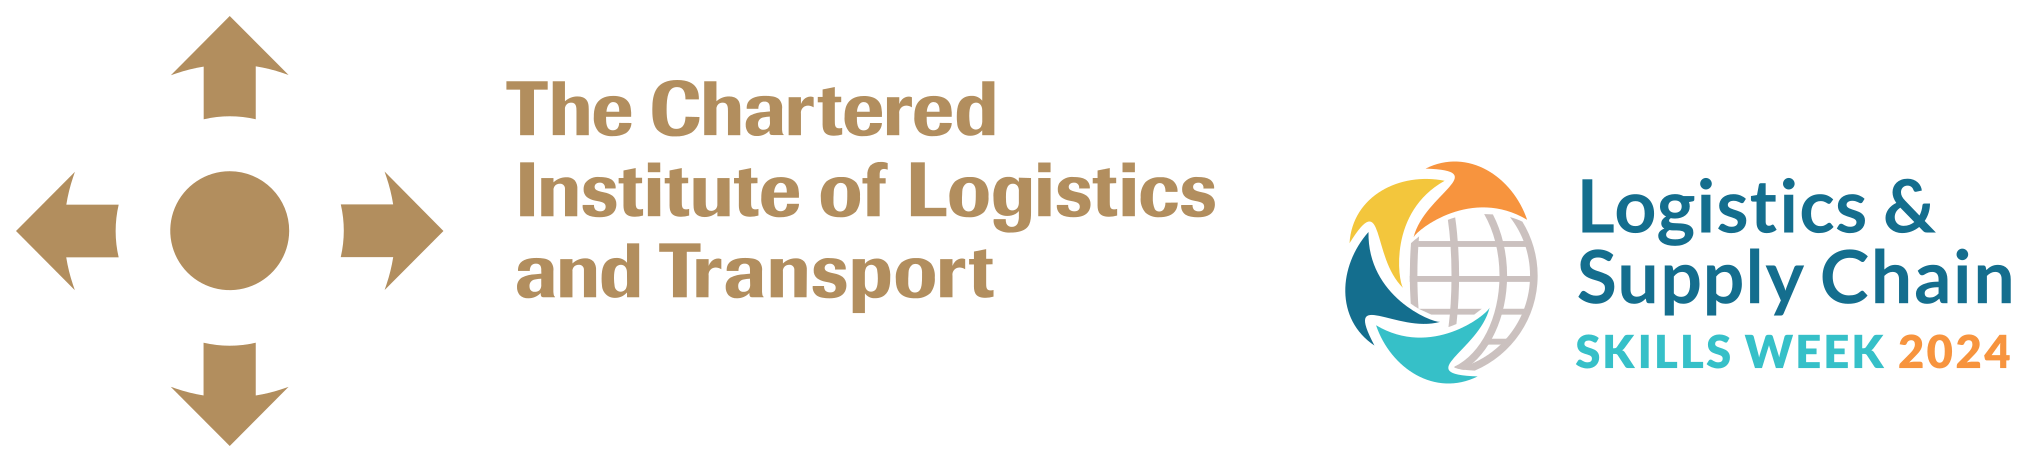 The Mobility and Supply Chain Summit